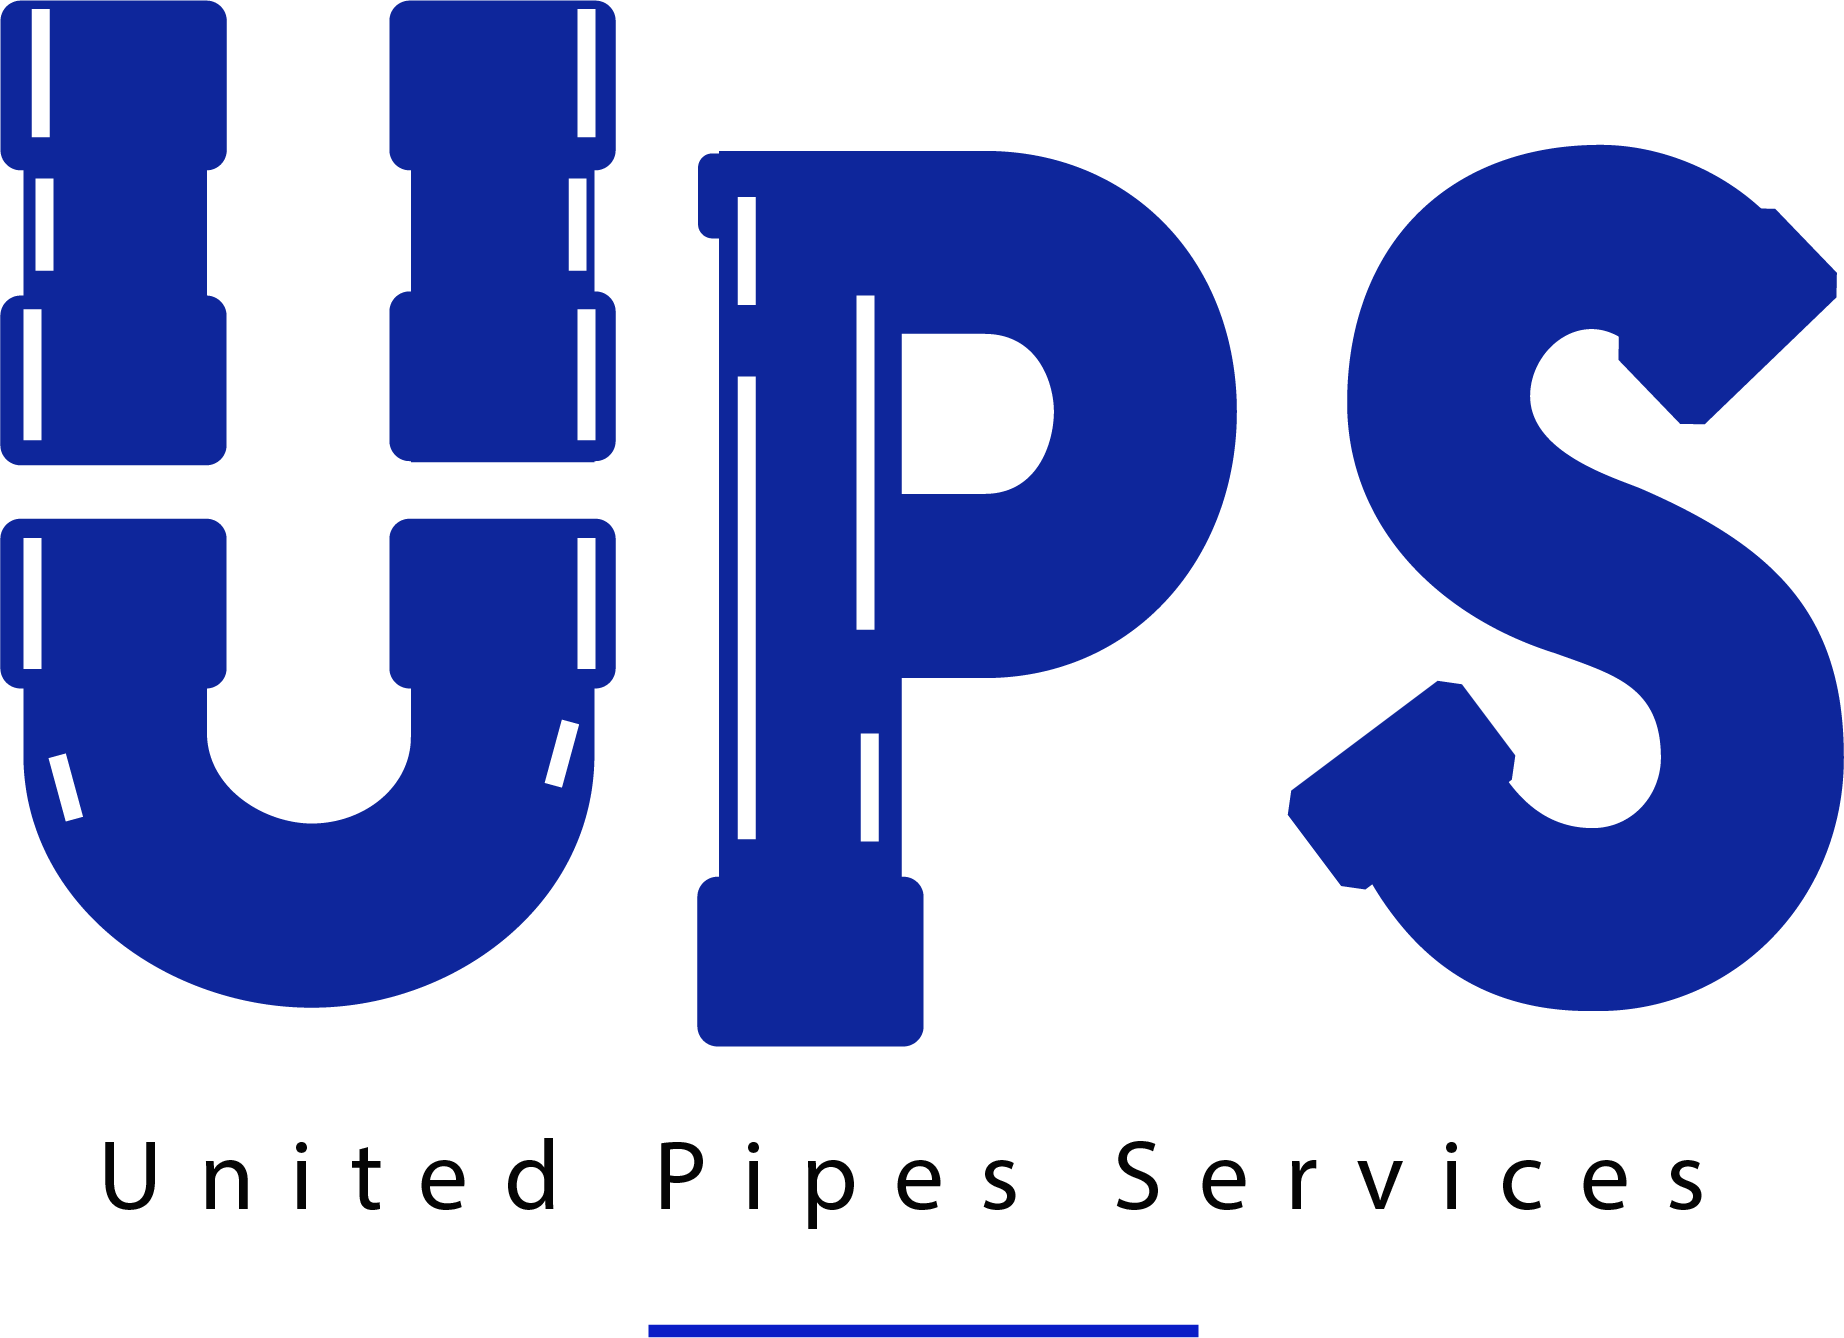 UPS UNITED PIPES SERVICES - logo